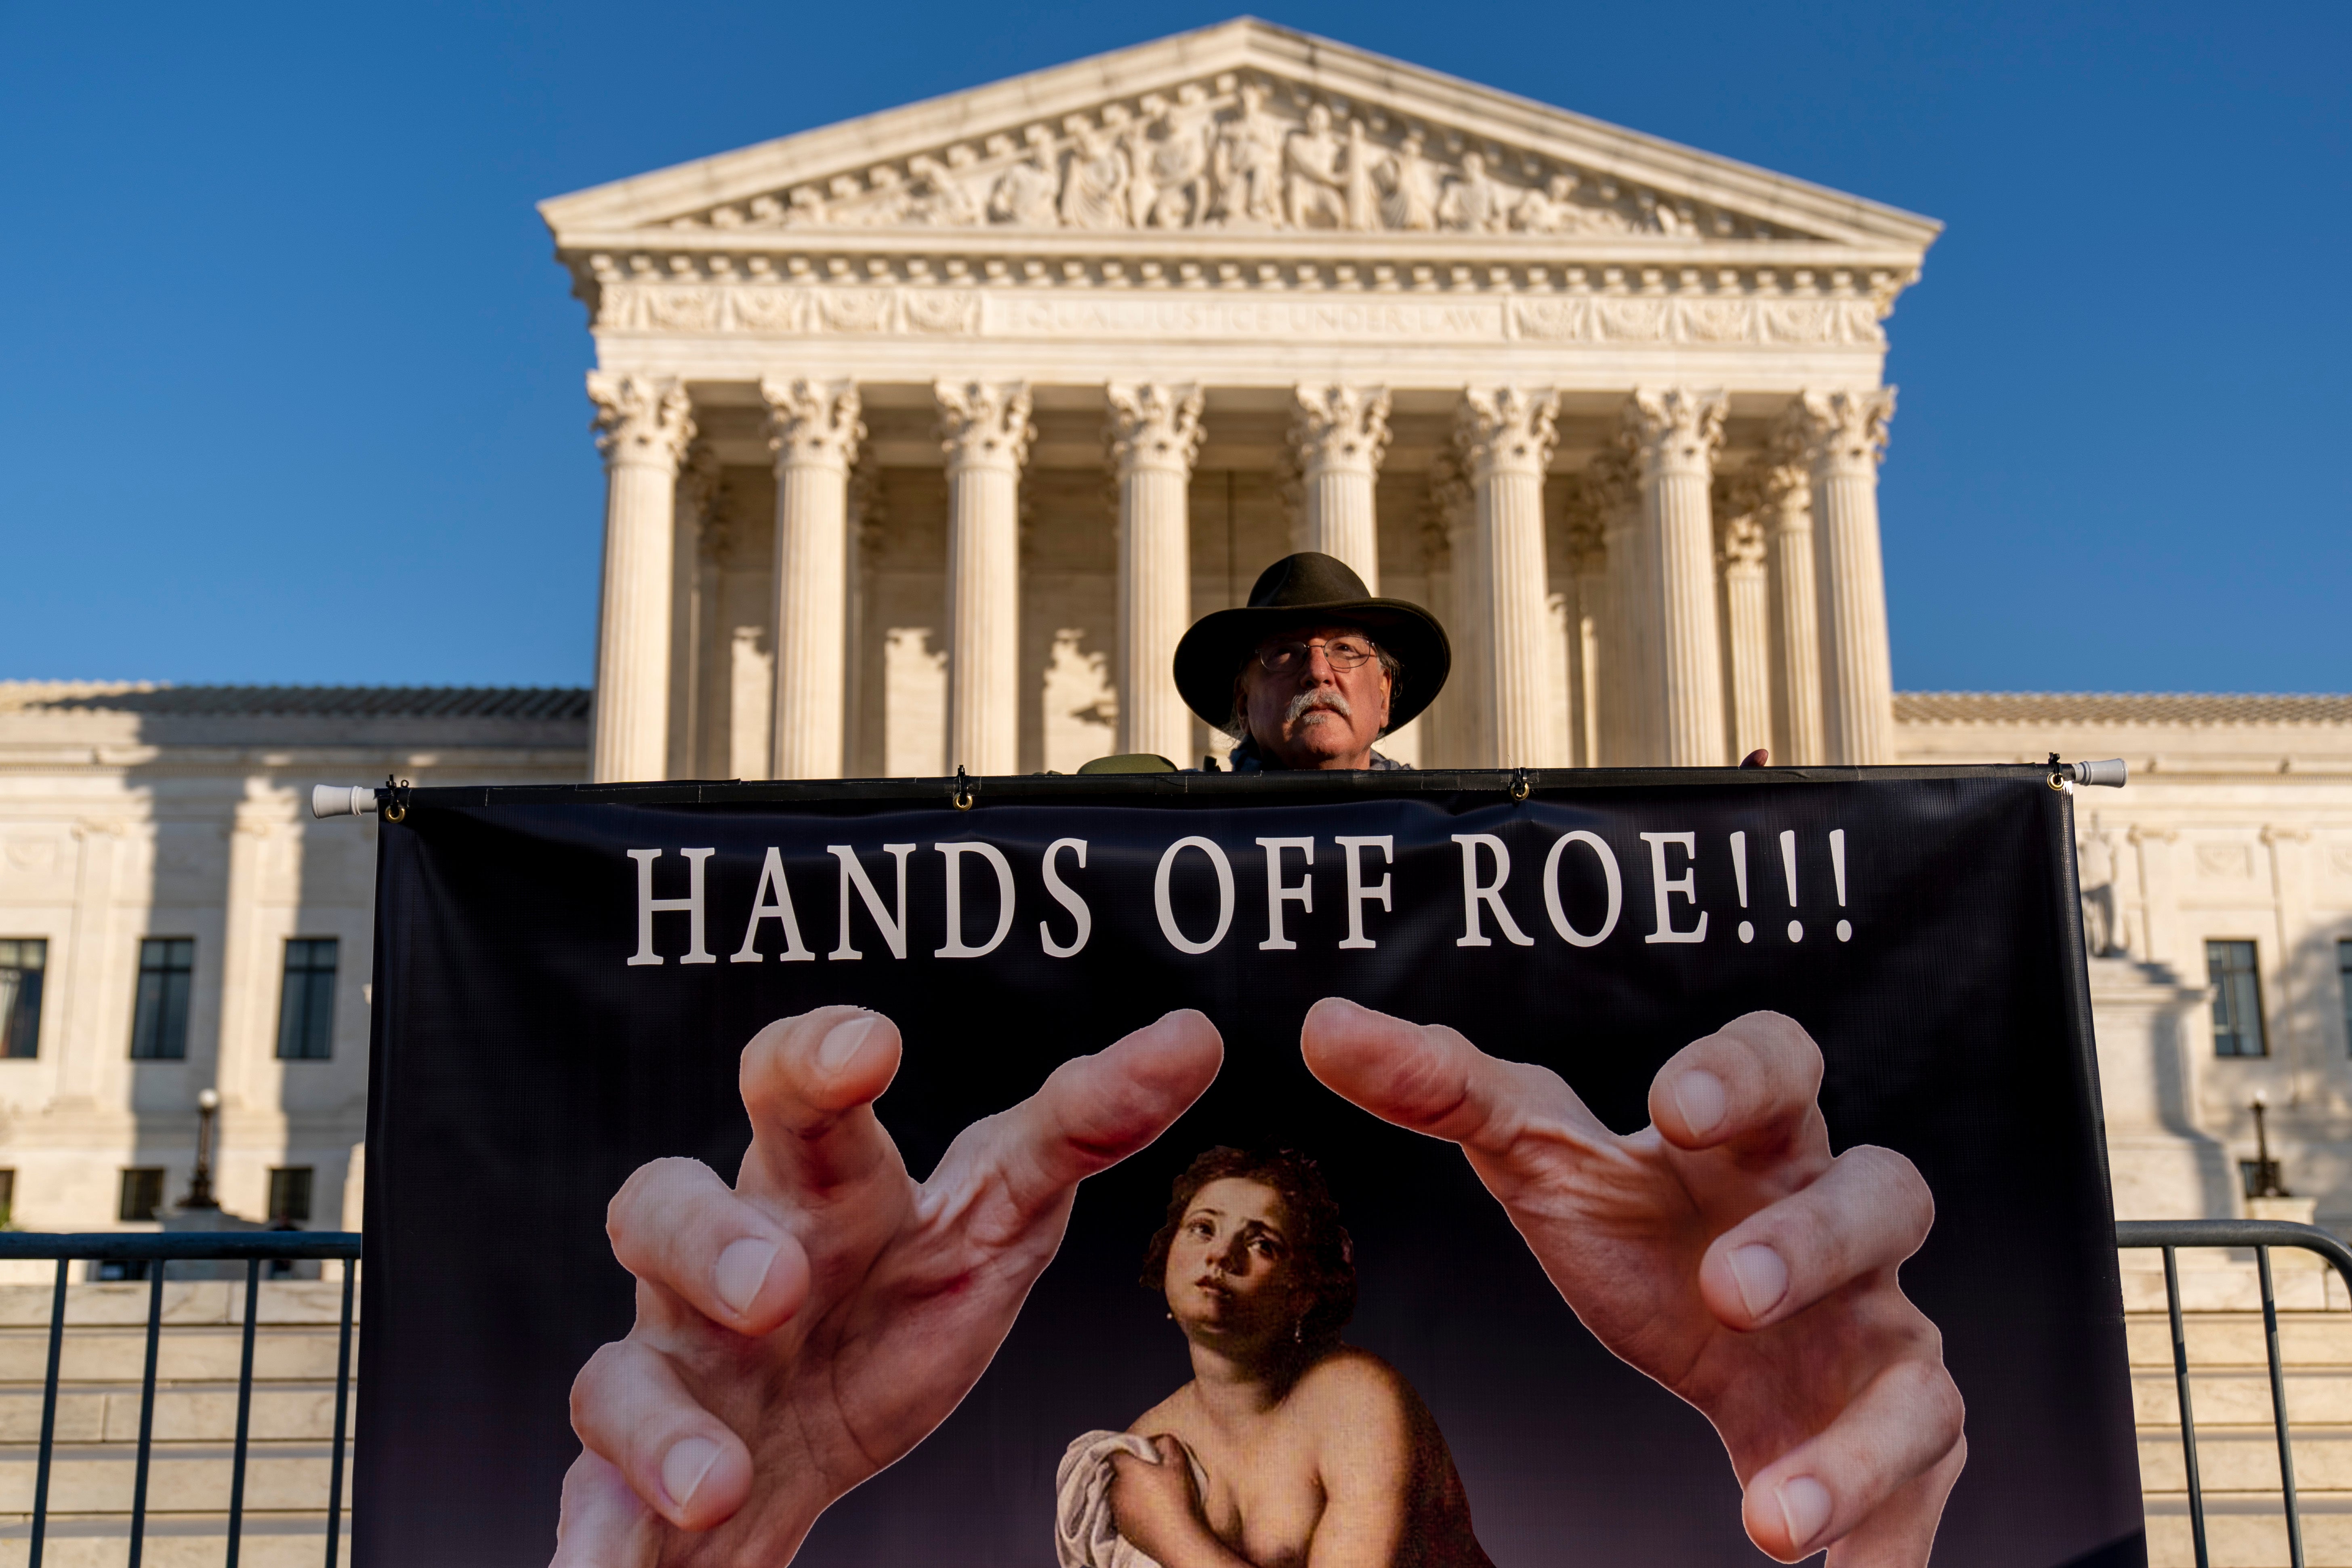 Abortion rights at stake in historic Supreme Court arguments The